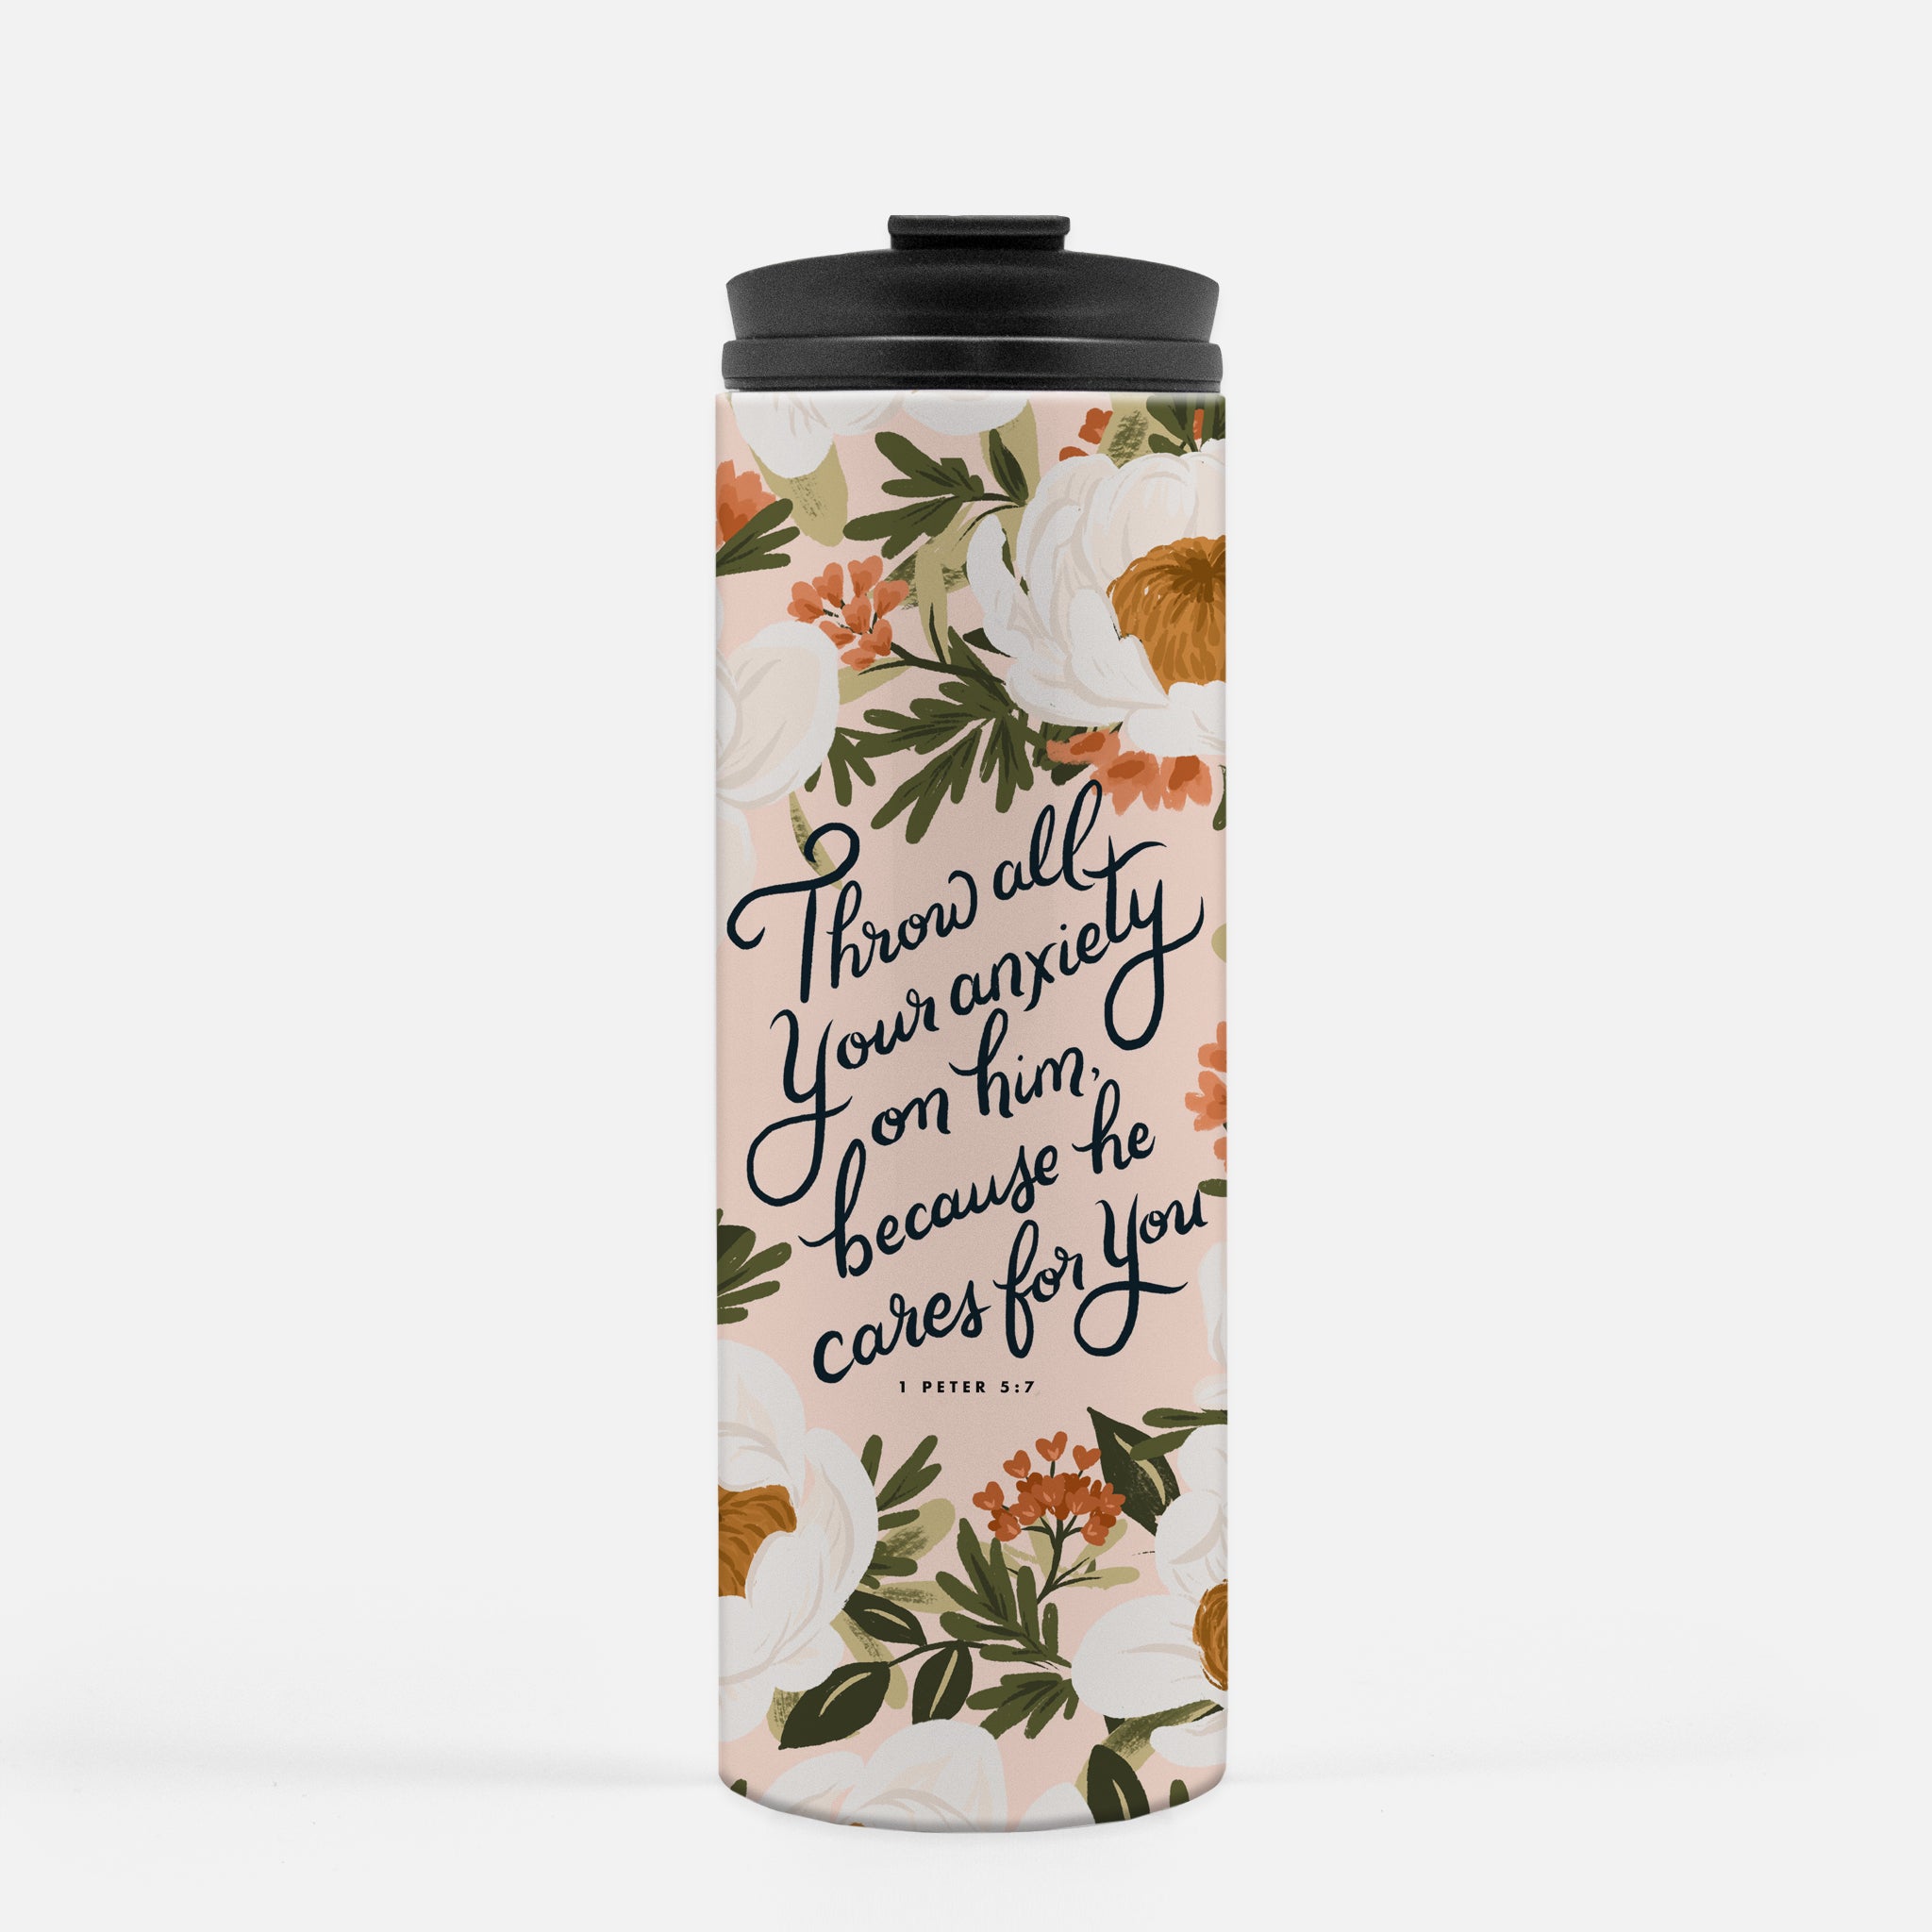 Travel Tumbler - Throw All Your Anxiety On Him, Because He Cares For You 1 Peter 5:7